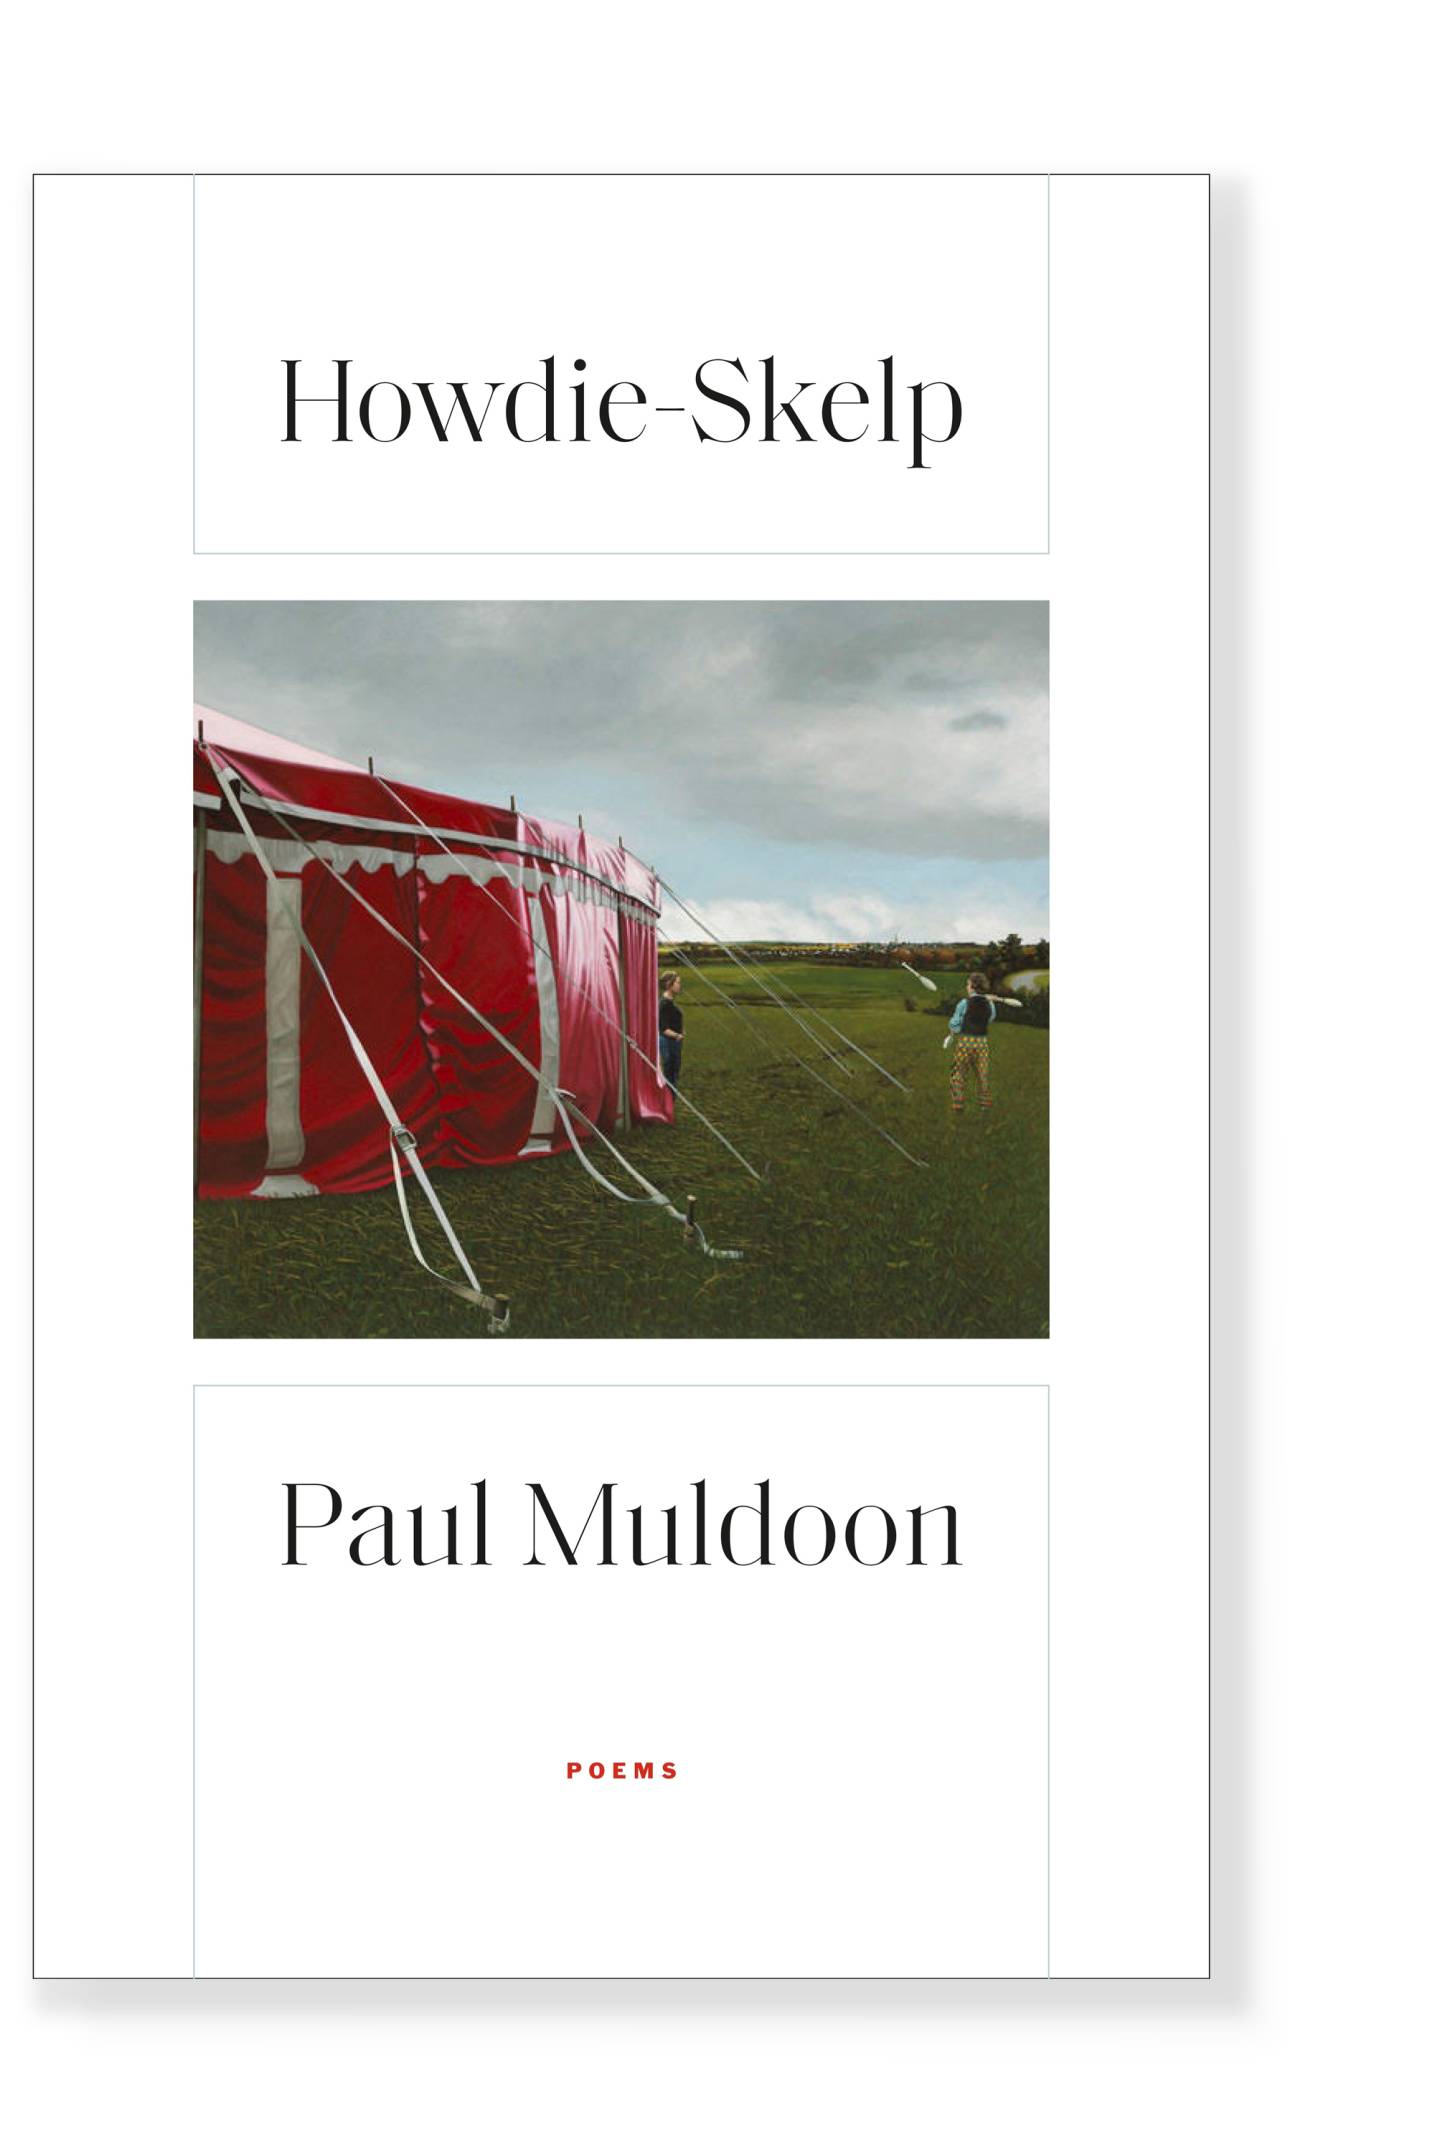 Howdie-Skelp by Paul Muldoon. A red tent in a grassy field.